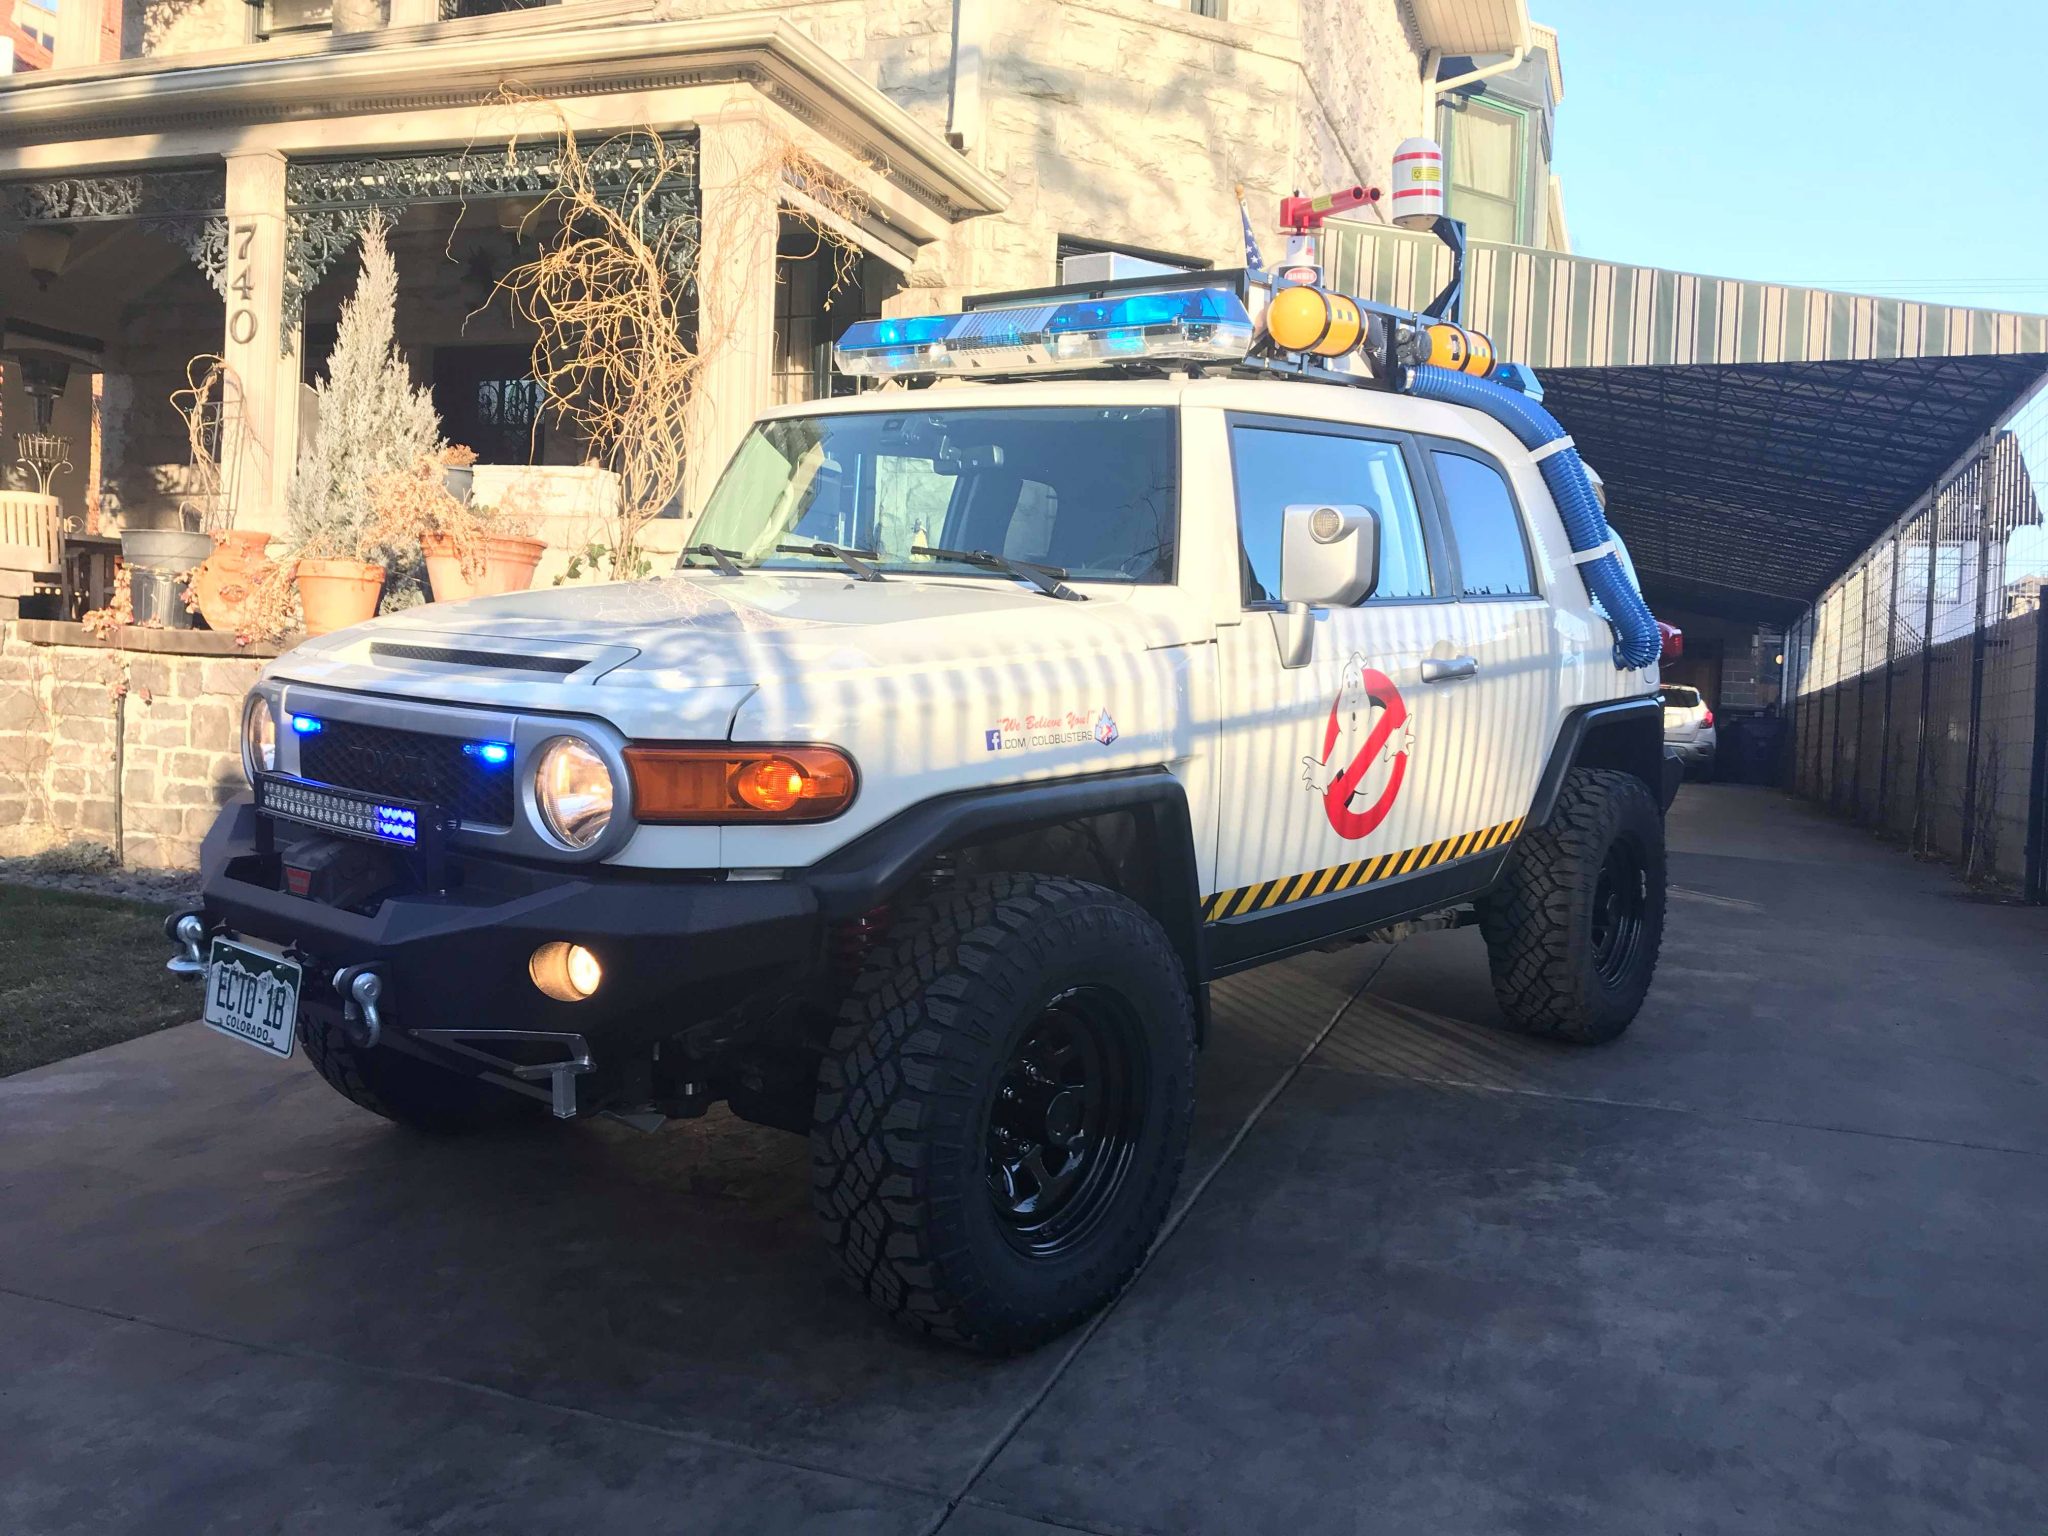 ghostbusters ecto 1b